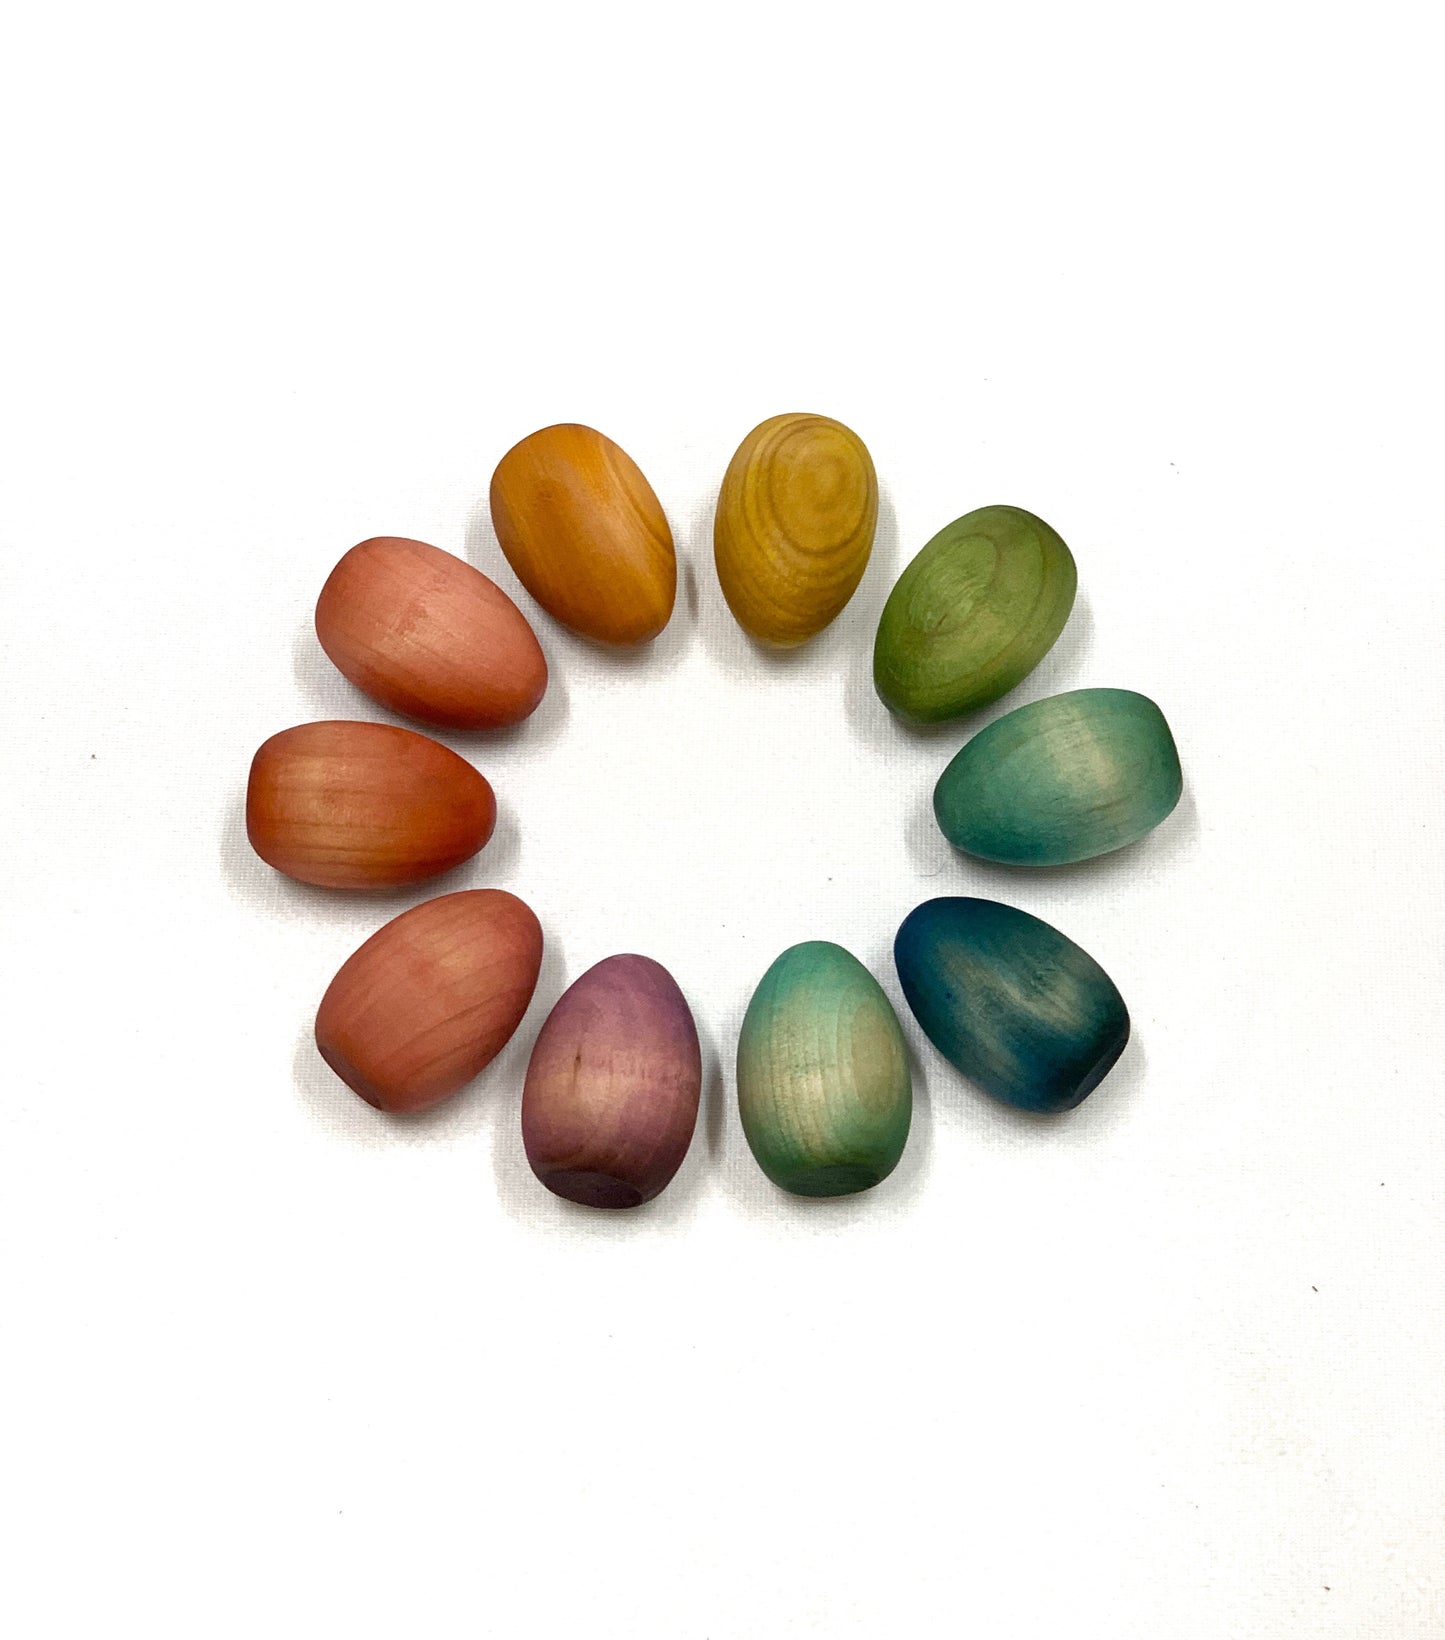 Naturally Dyed Wooden Eggs